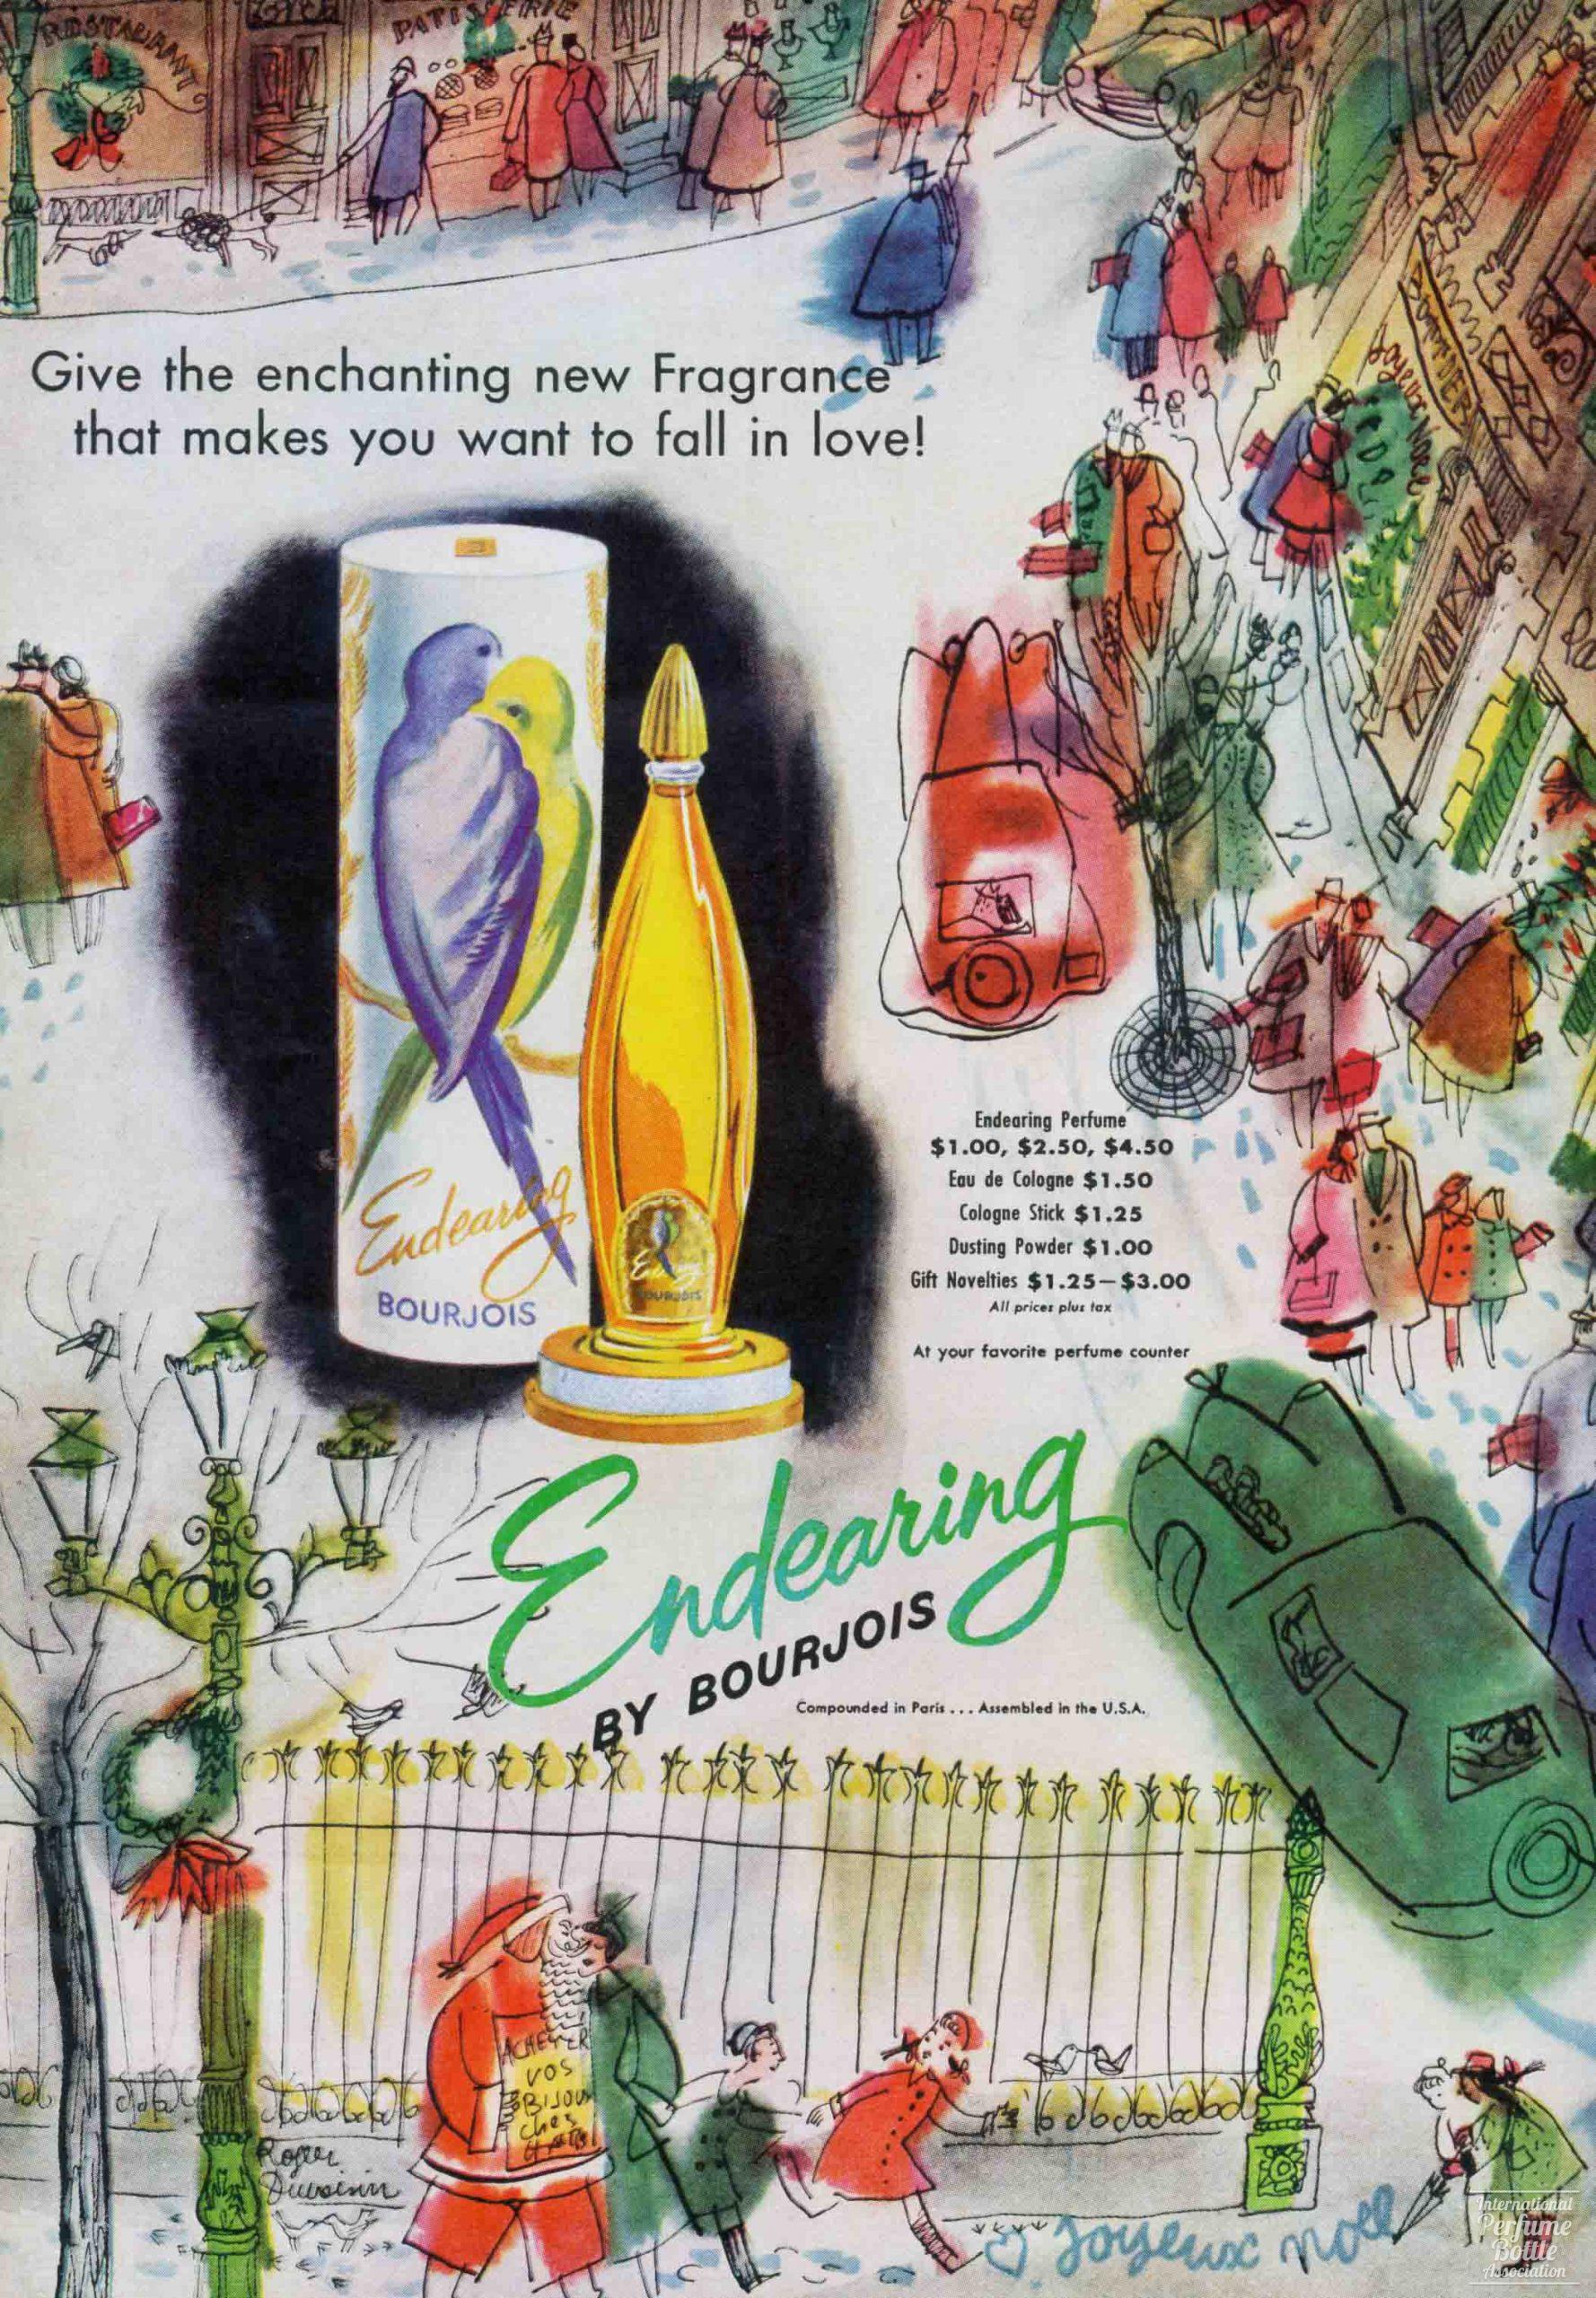 "Endearing" by Bourjois Advertisement - 1951